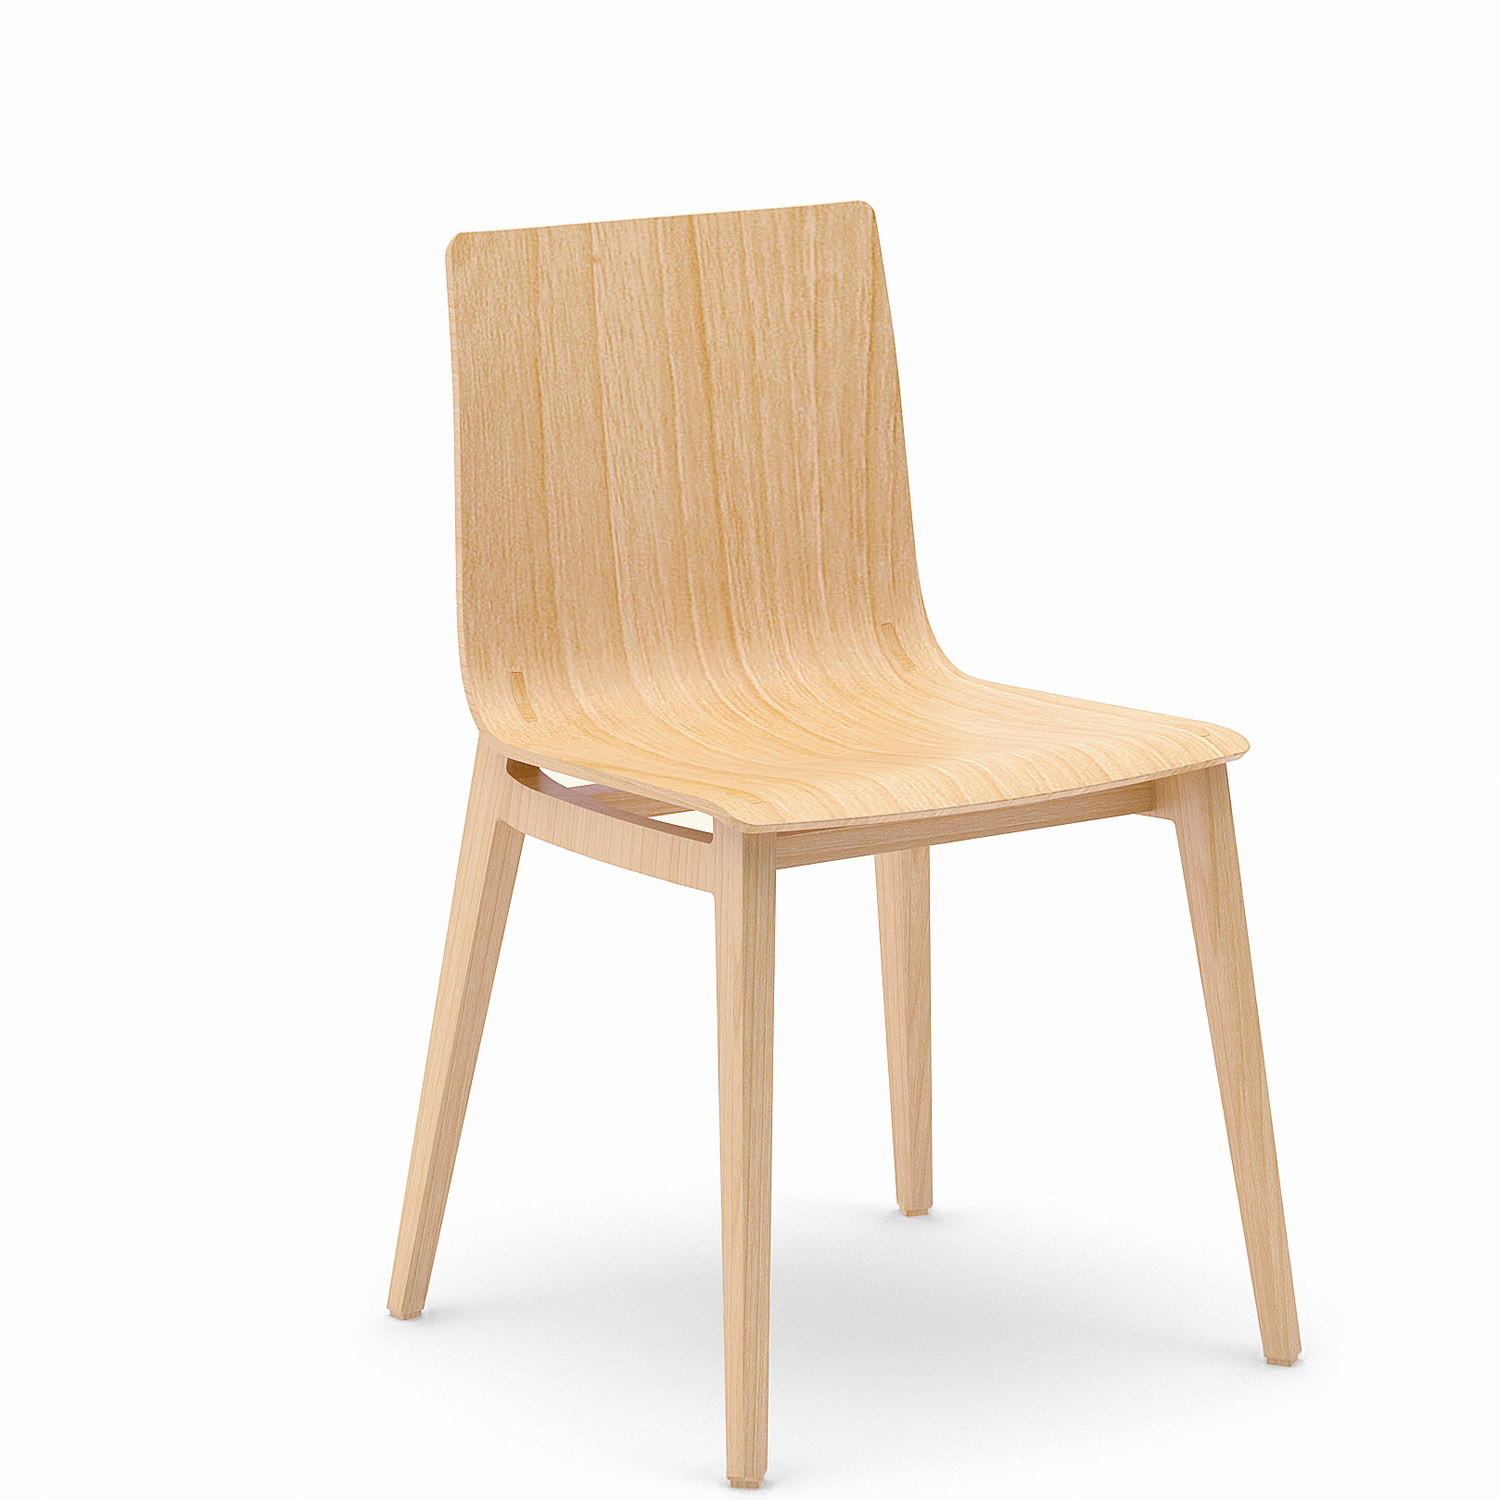 Emma Wooden Dining Chair